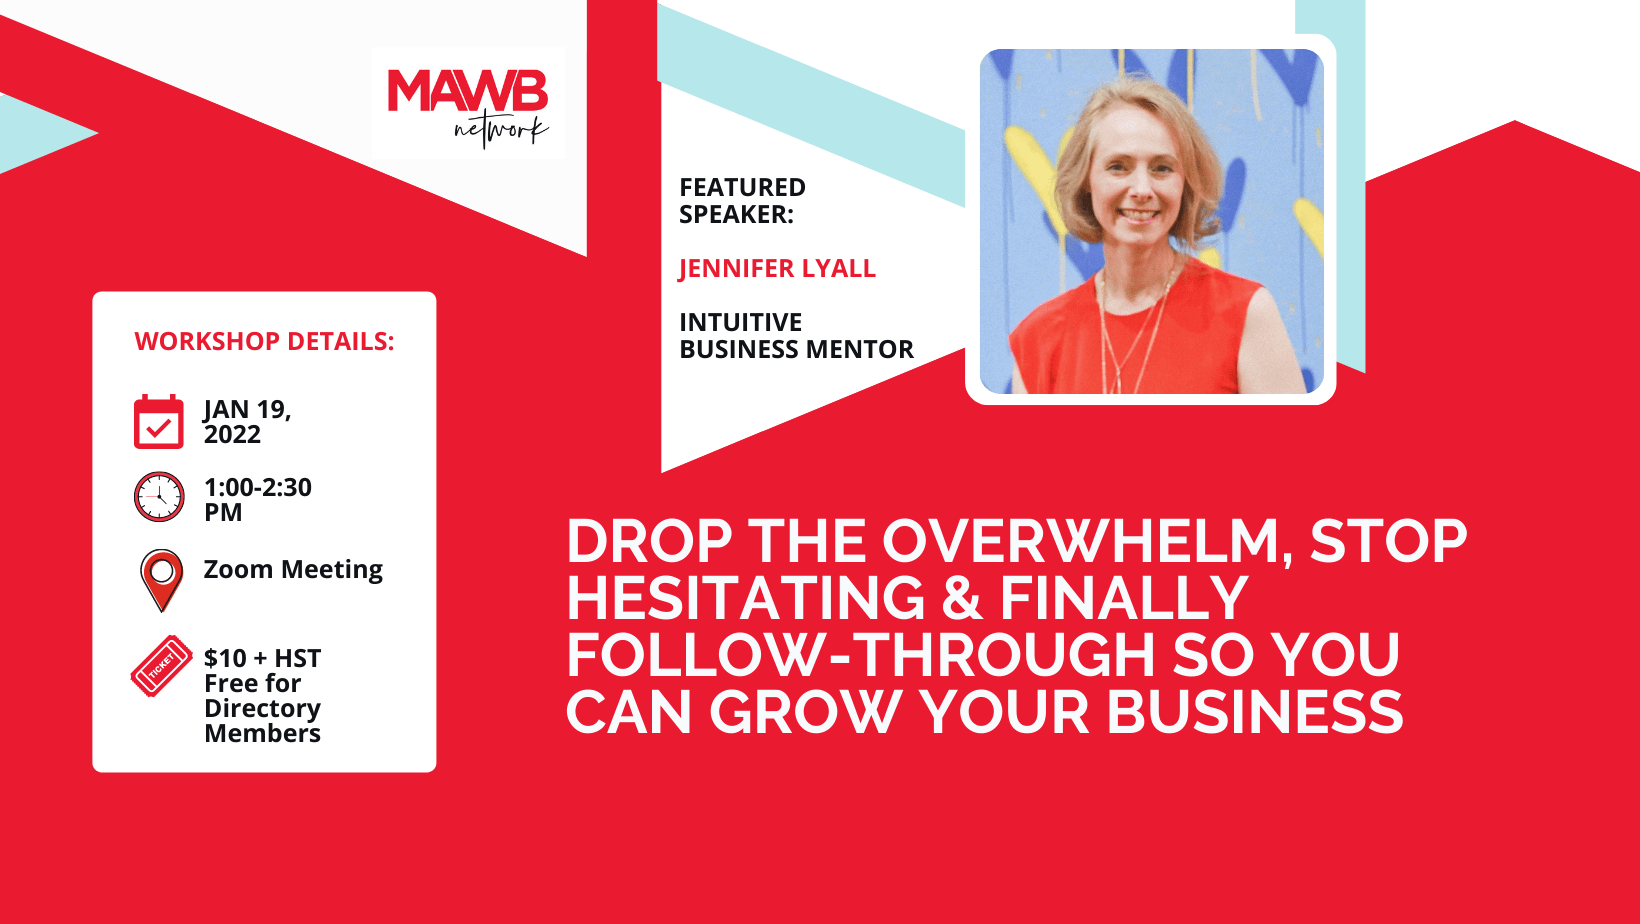 Drop the Overwhelm, Stop Hesitating & Finally Follow-through so you can Grow Your Business